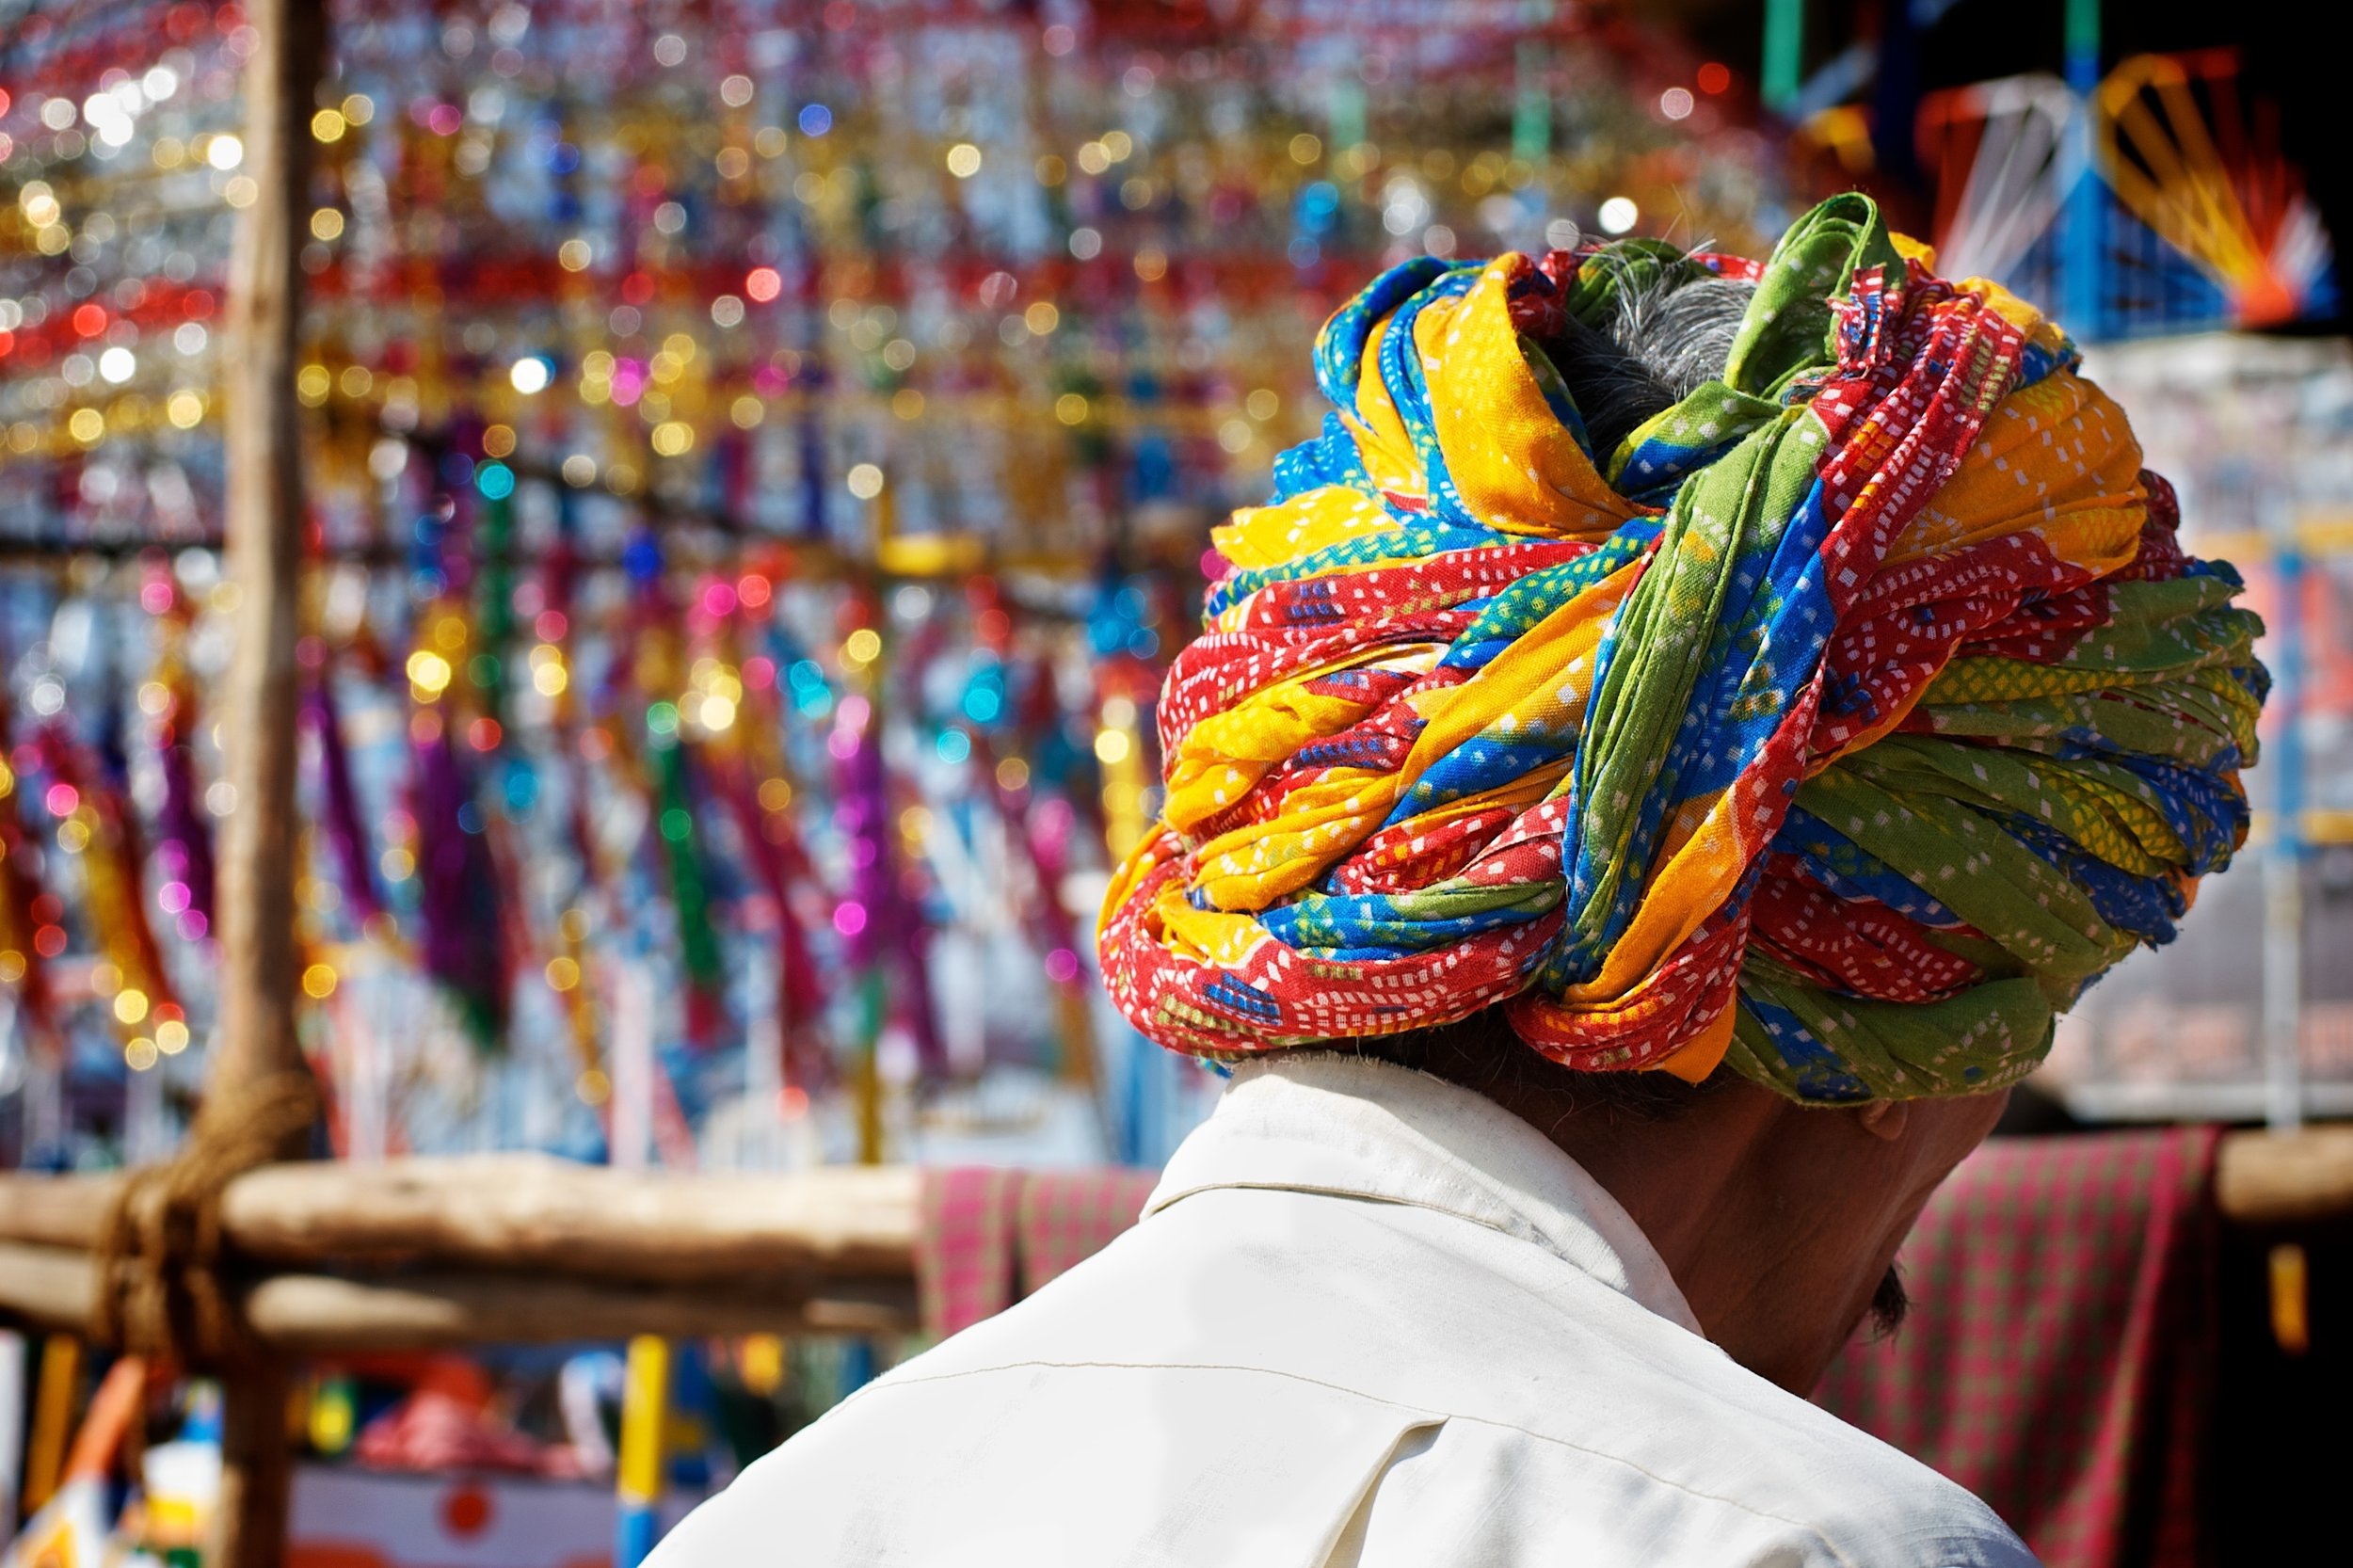 Man wearing a turban in a market place in India.jpg